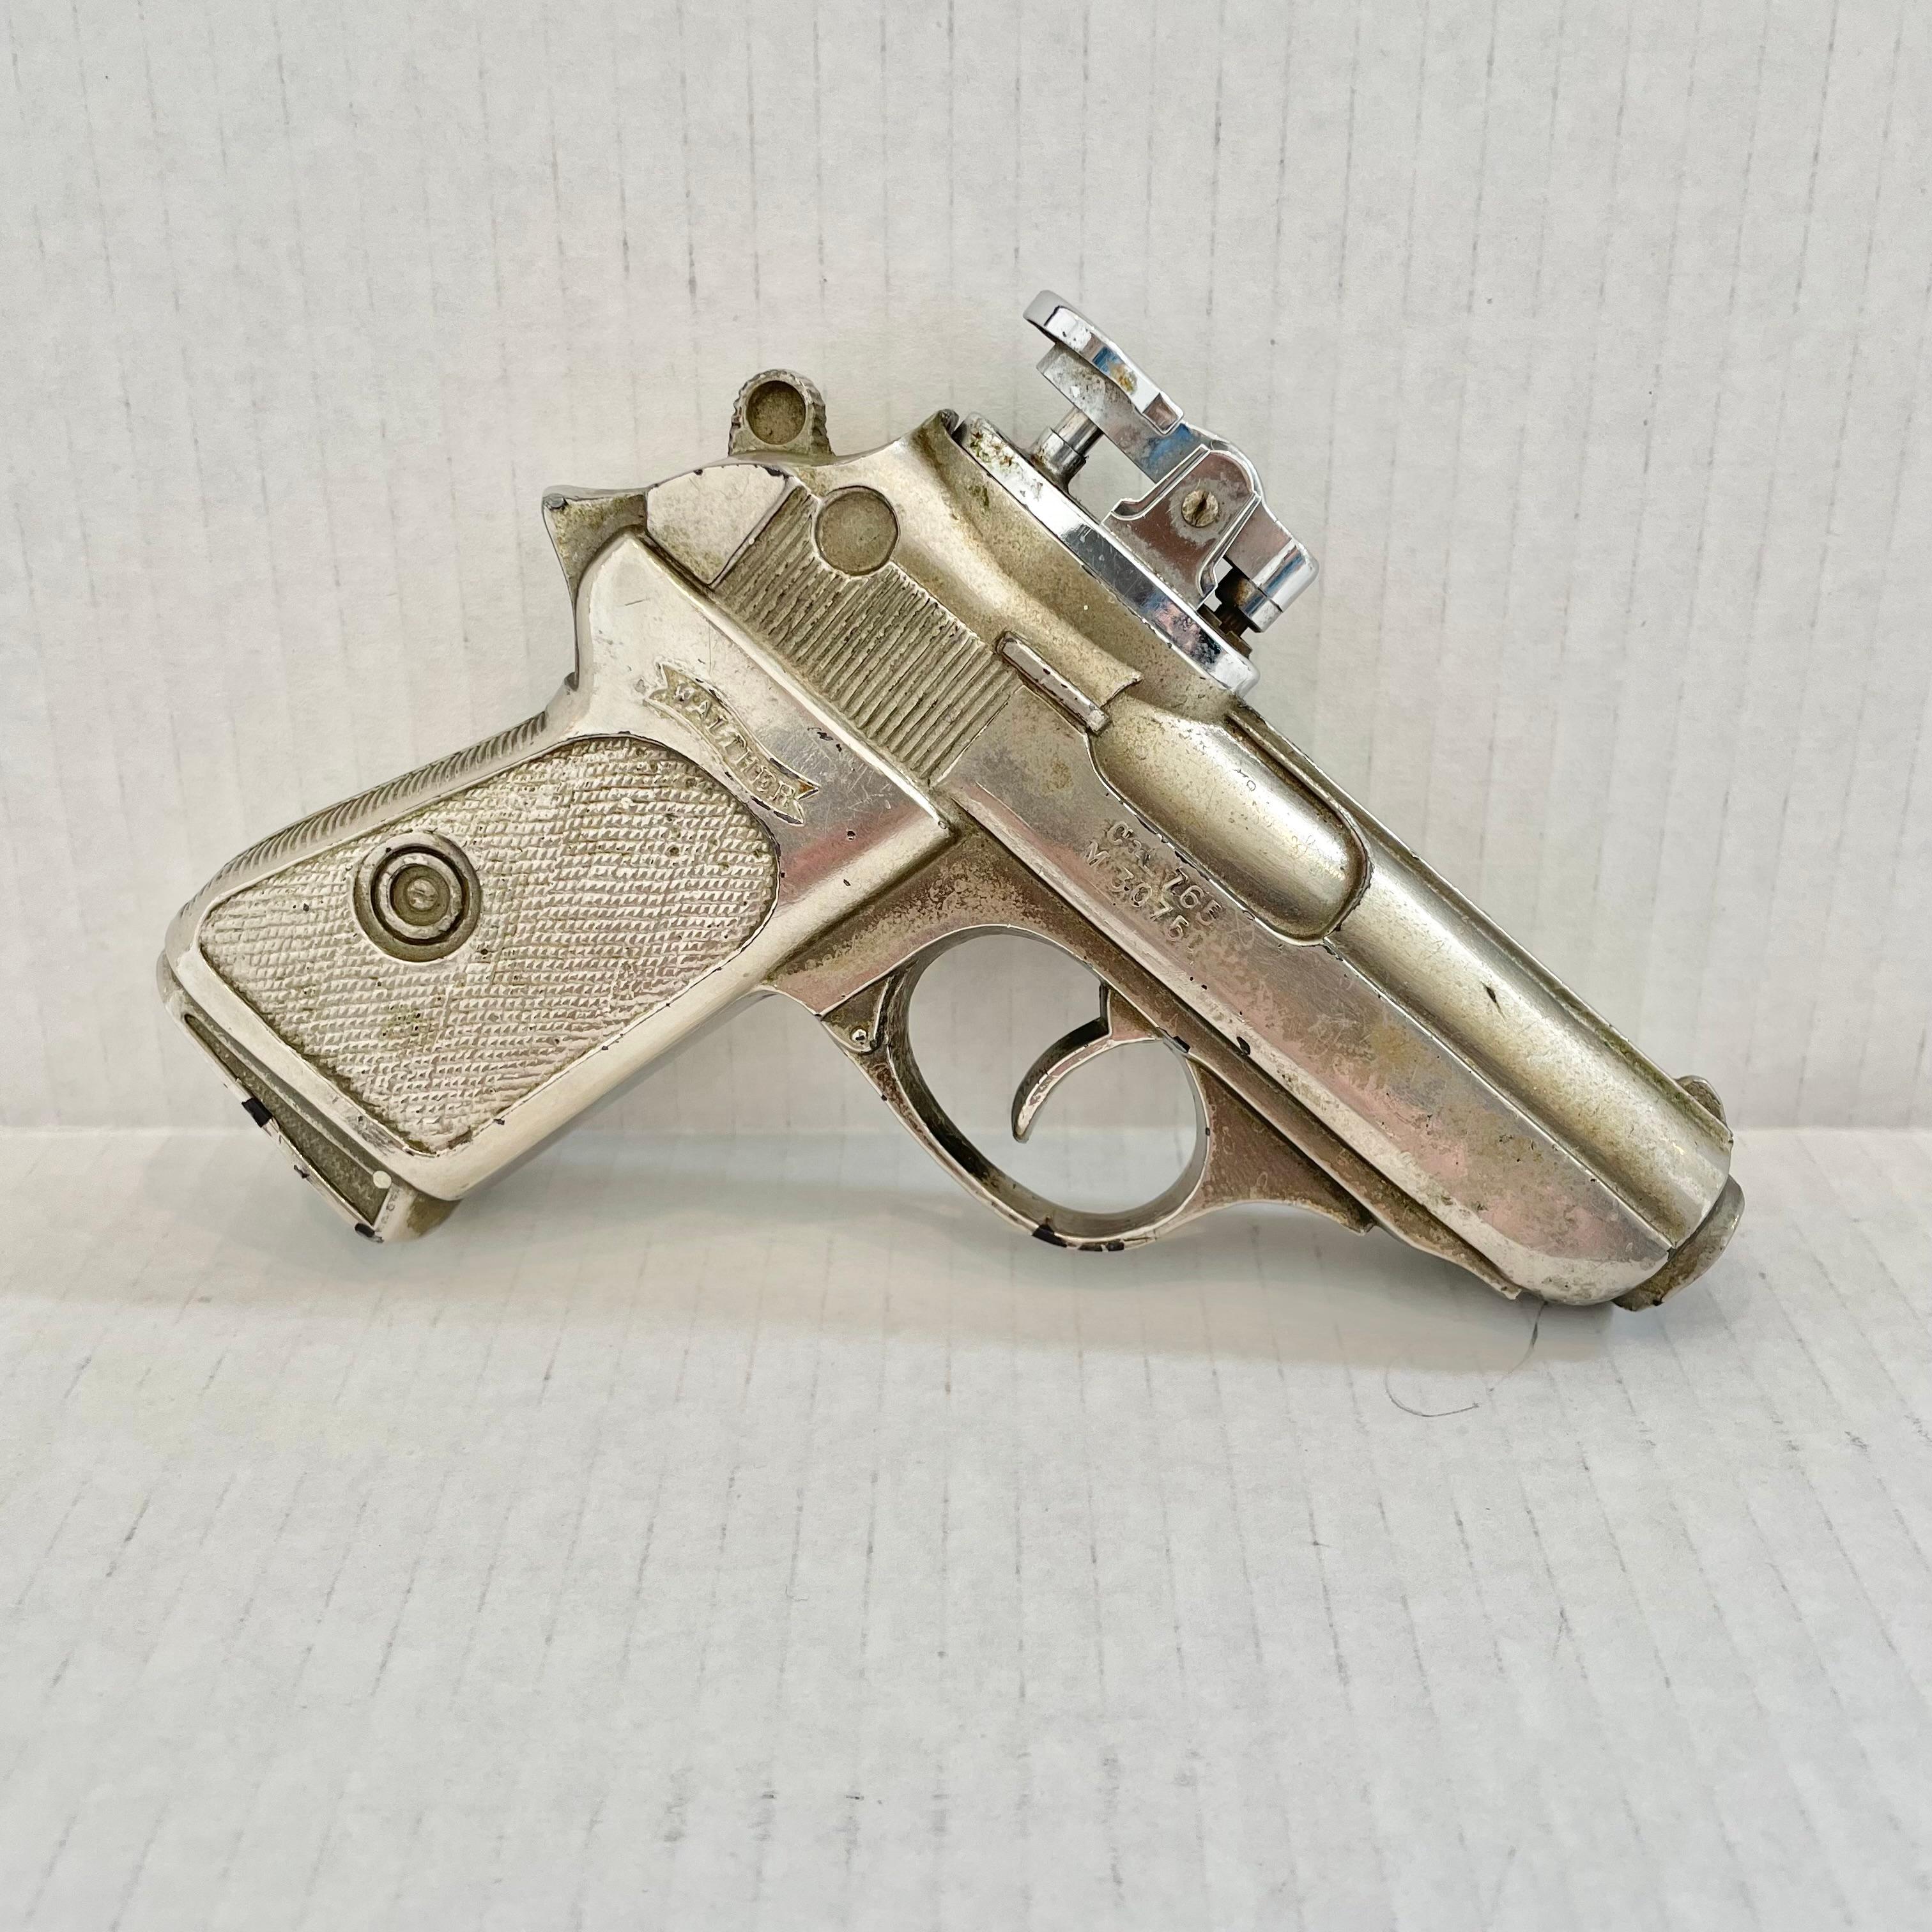 Cool vintage table lighter in the shape of a Walther PPK. Made completely of metal with a hollow body. Beautiful burnished silver color with intricate details. Cool tobacco accessory and conversation piece. Working lighter. Very unusual piece. Made